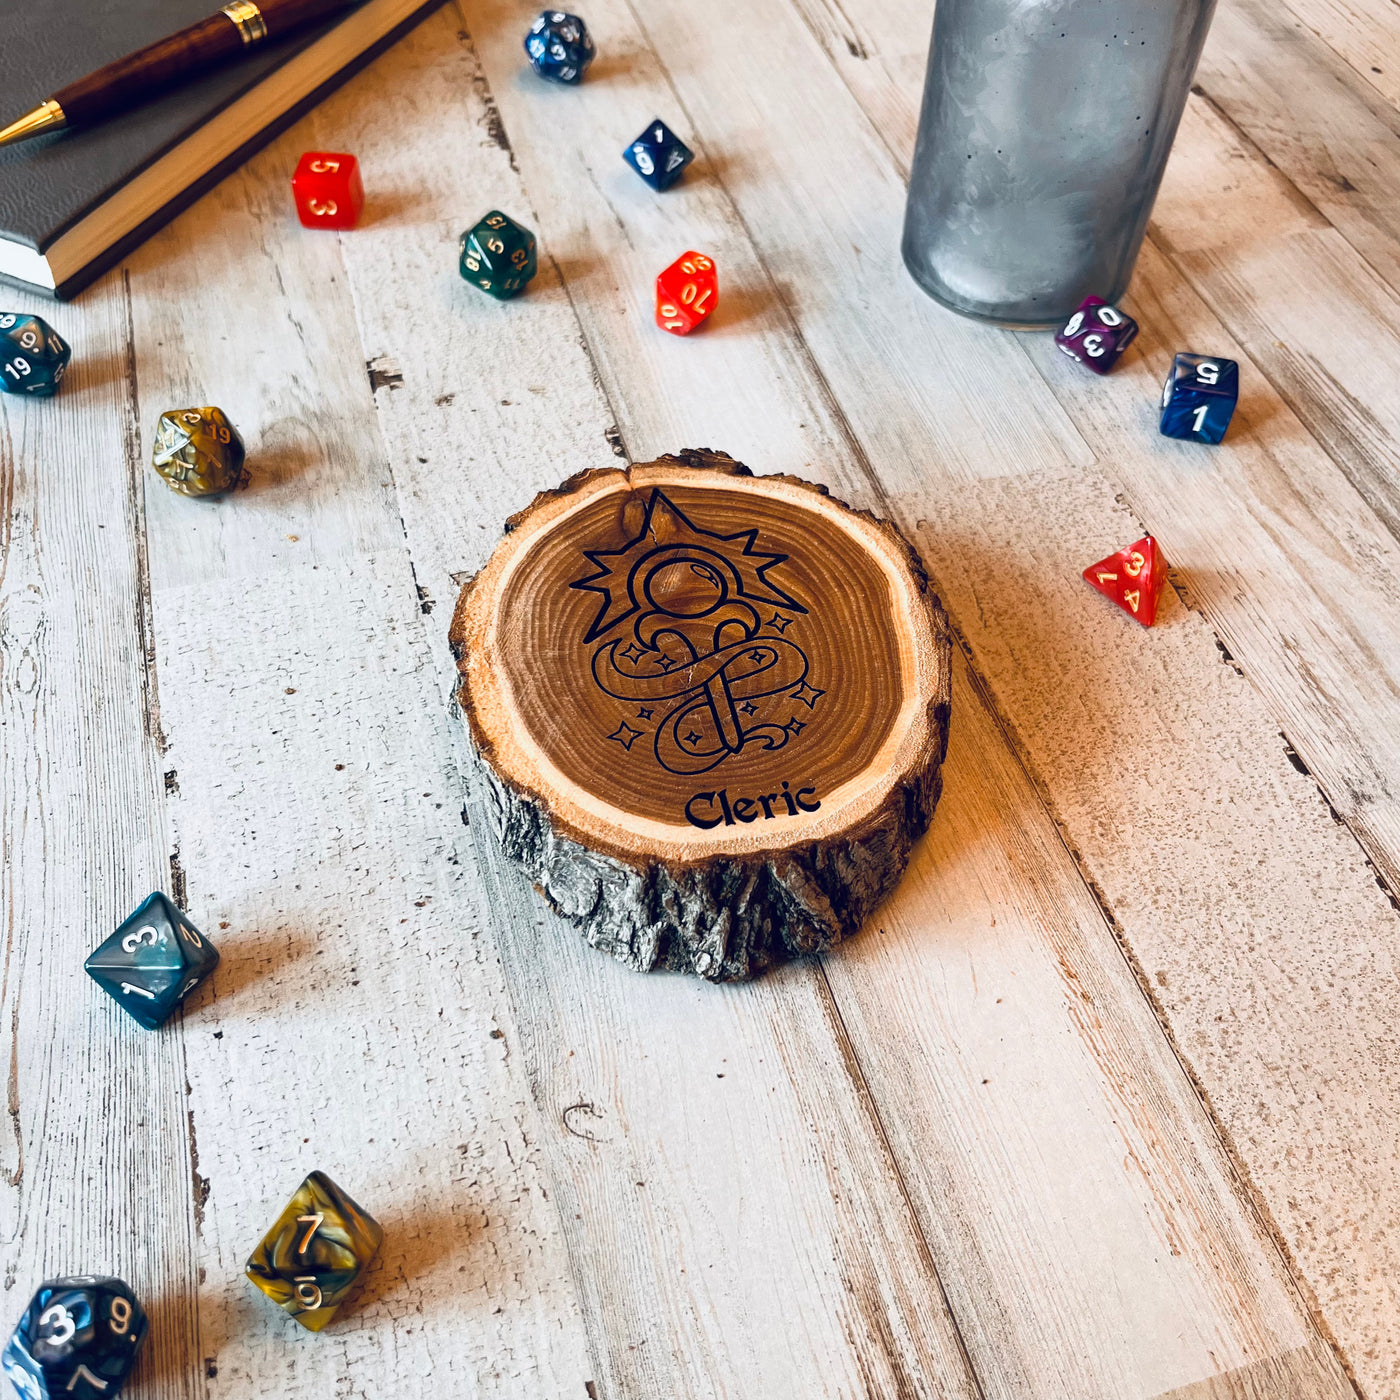 Dungeons and Dragons Real Wood Cleric DnD Coaster | DnD Accessories | DnD Gift for Men | Dungeon Master Gift | DnD Stuff | D&D Gifts